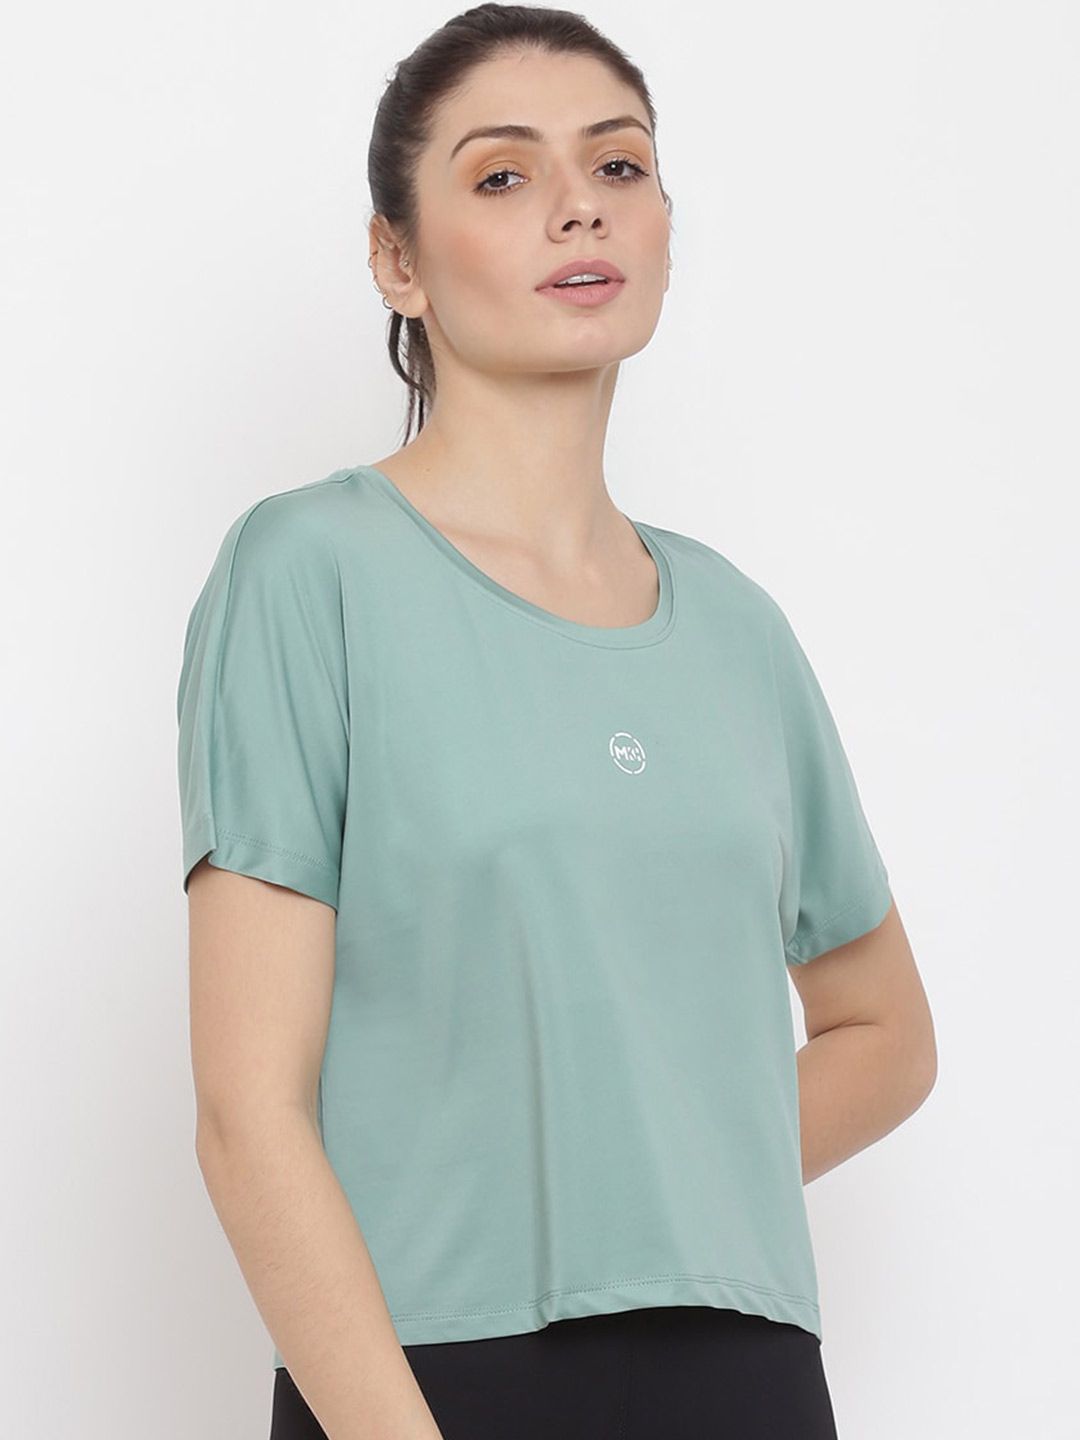 MKH Women Sage Green Extended Sleeves Dri-FIT Running T-shirt Price in India